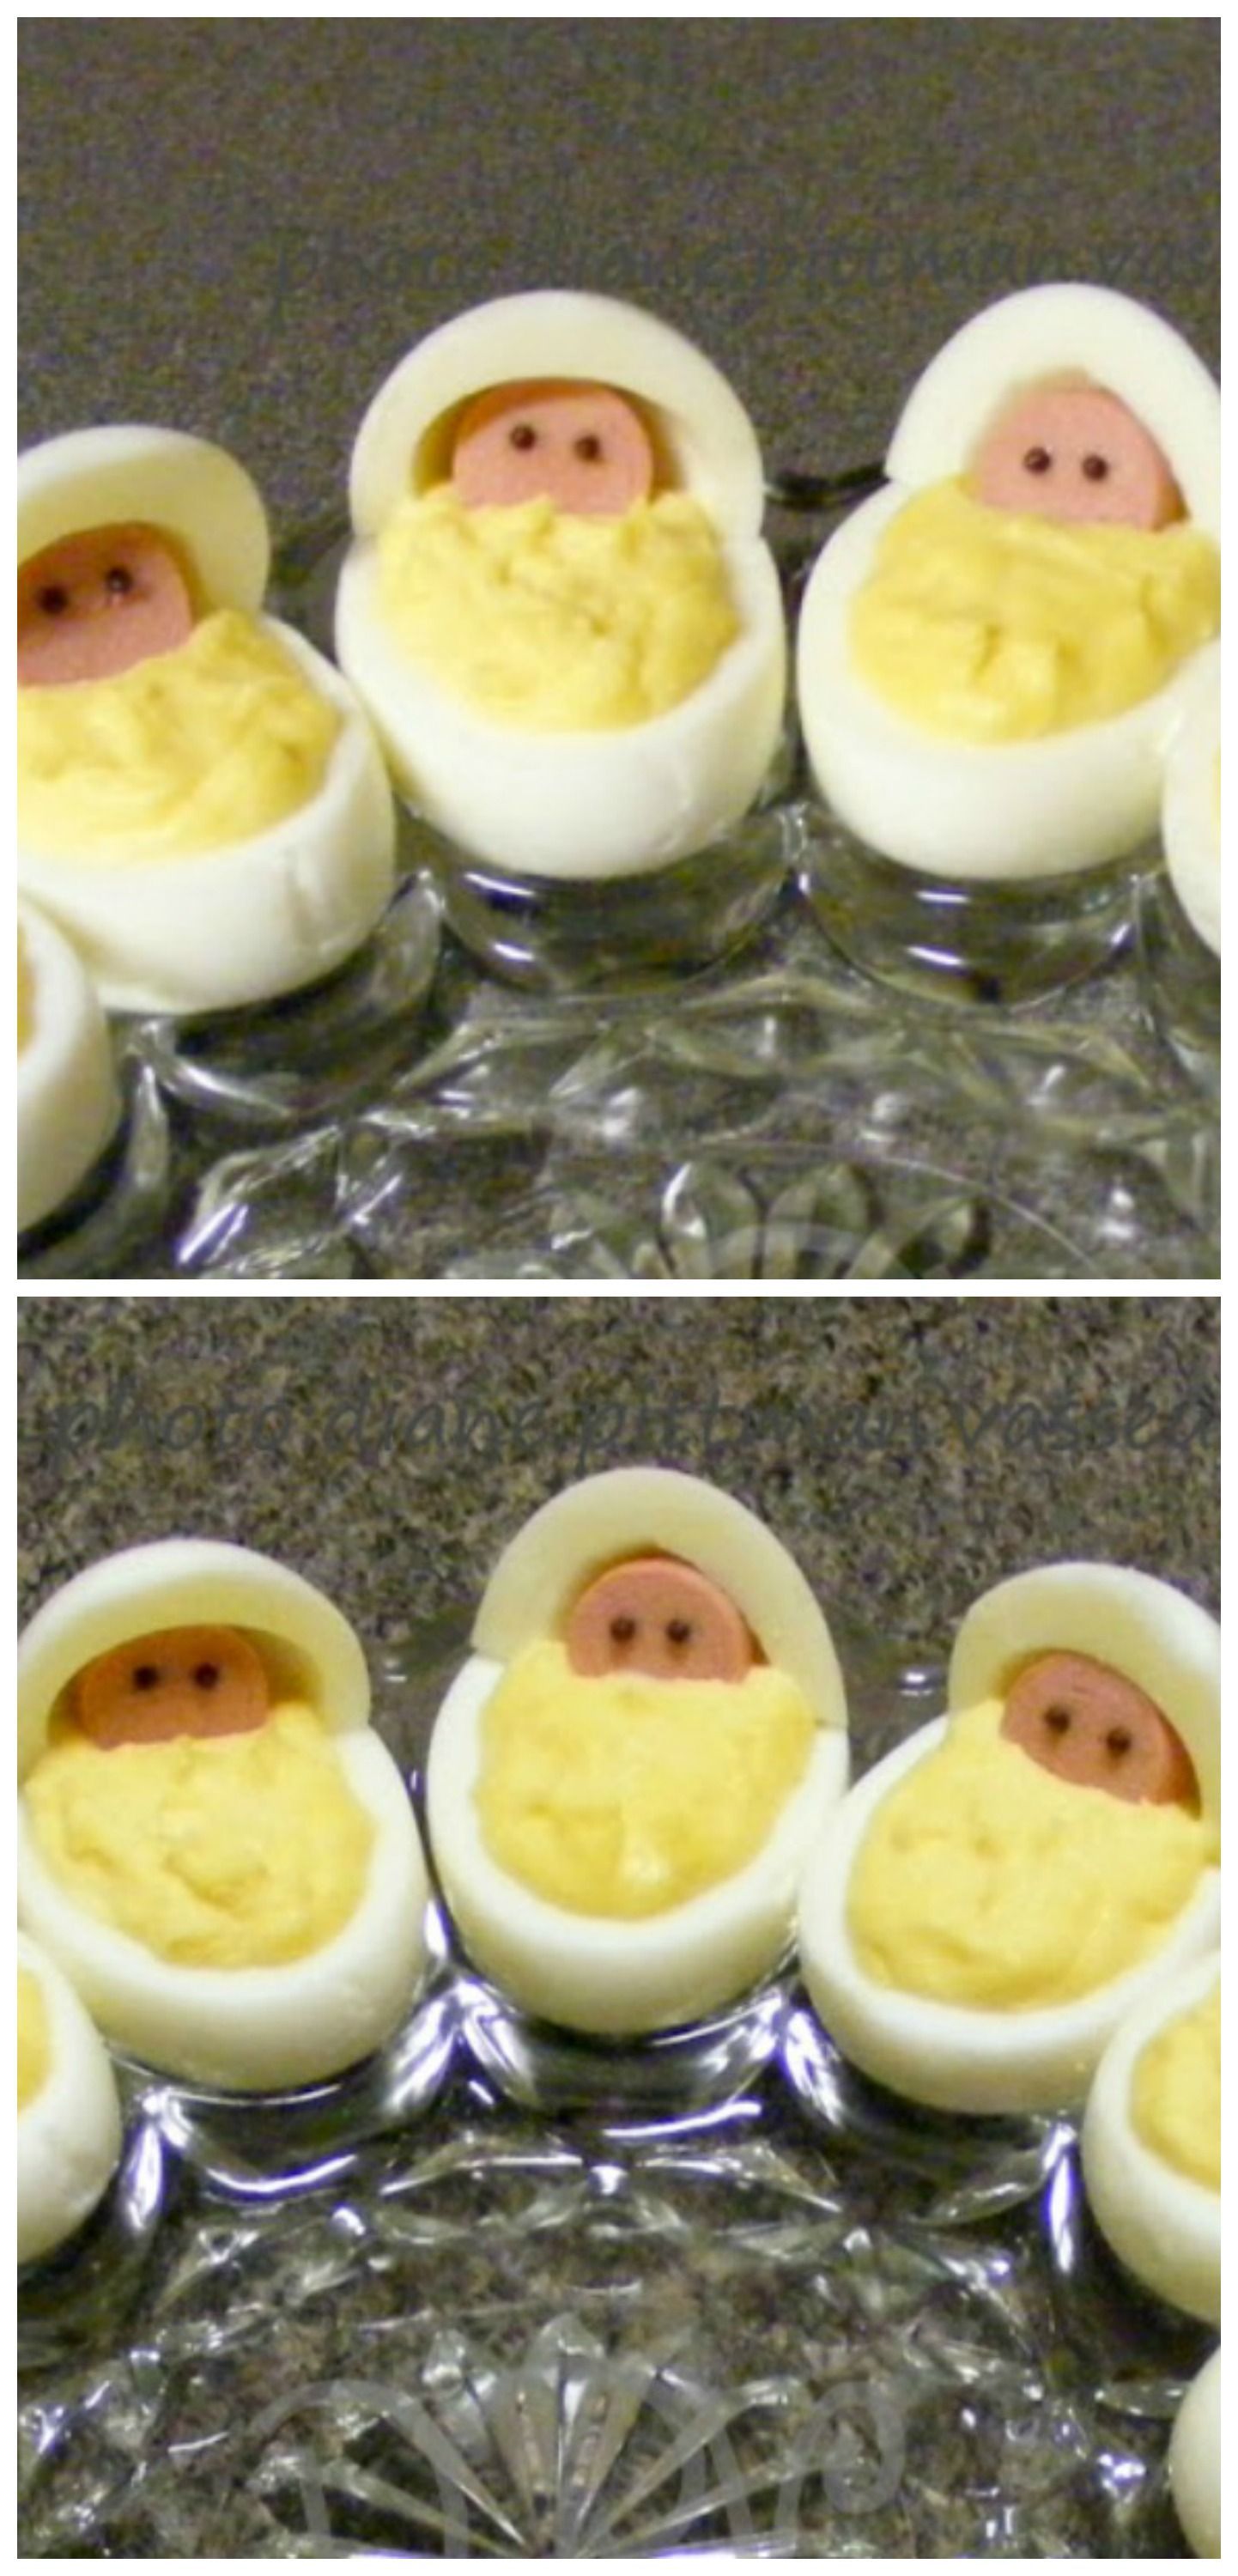 Newborn Babies Deviled Eggs ~ Fun idea for a baby shower… Deviled eggs are decorated with thin slices of vienna sausage and